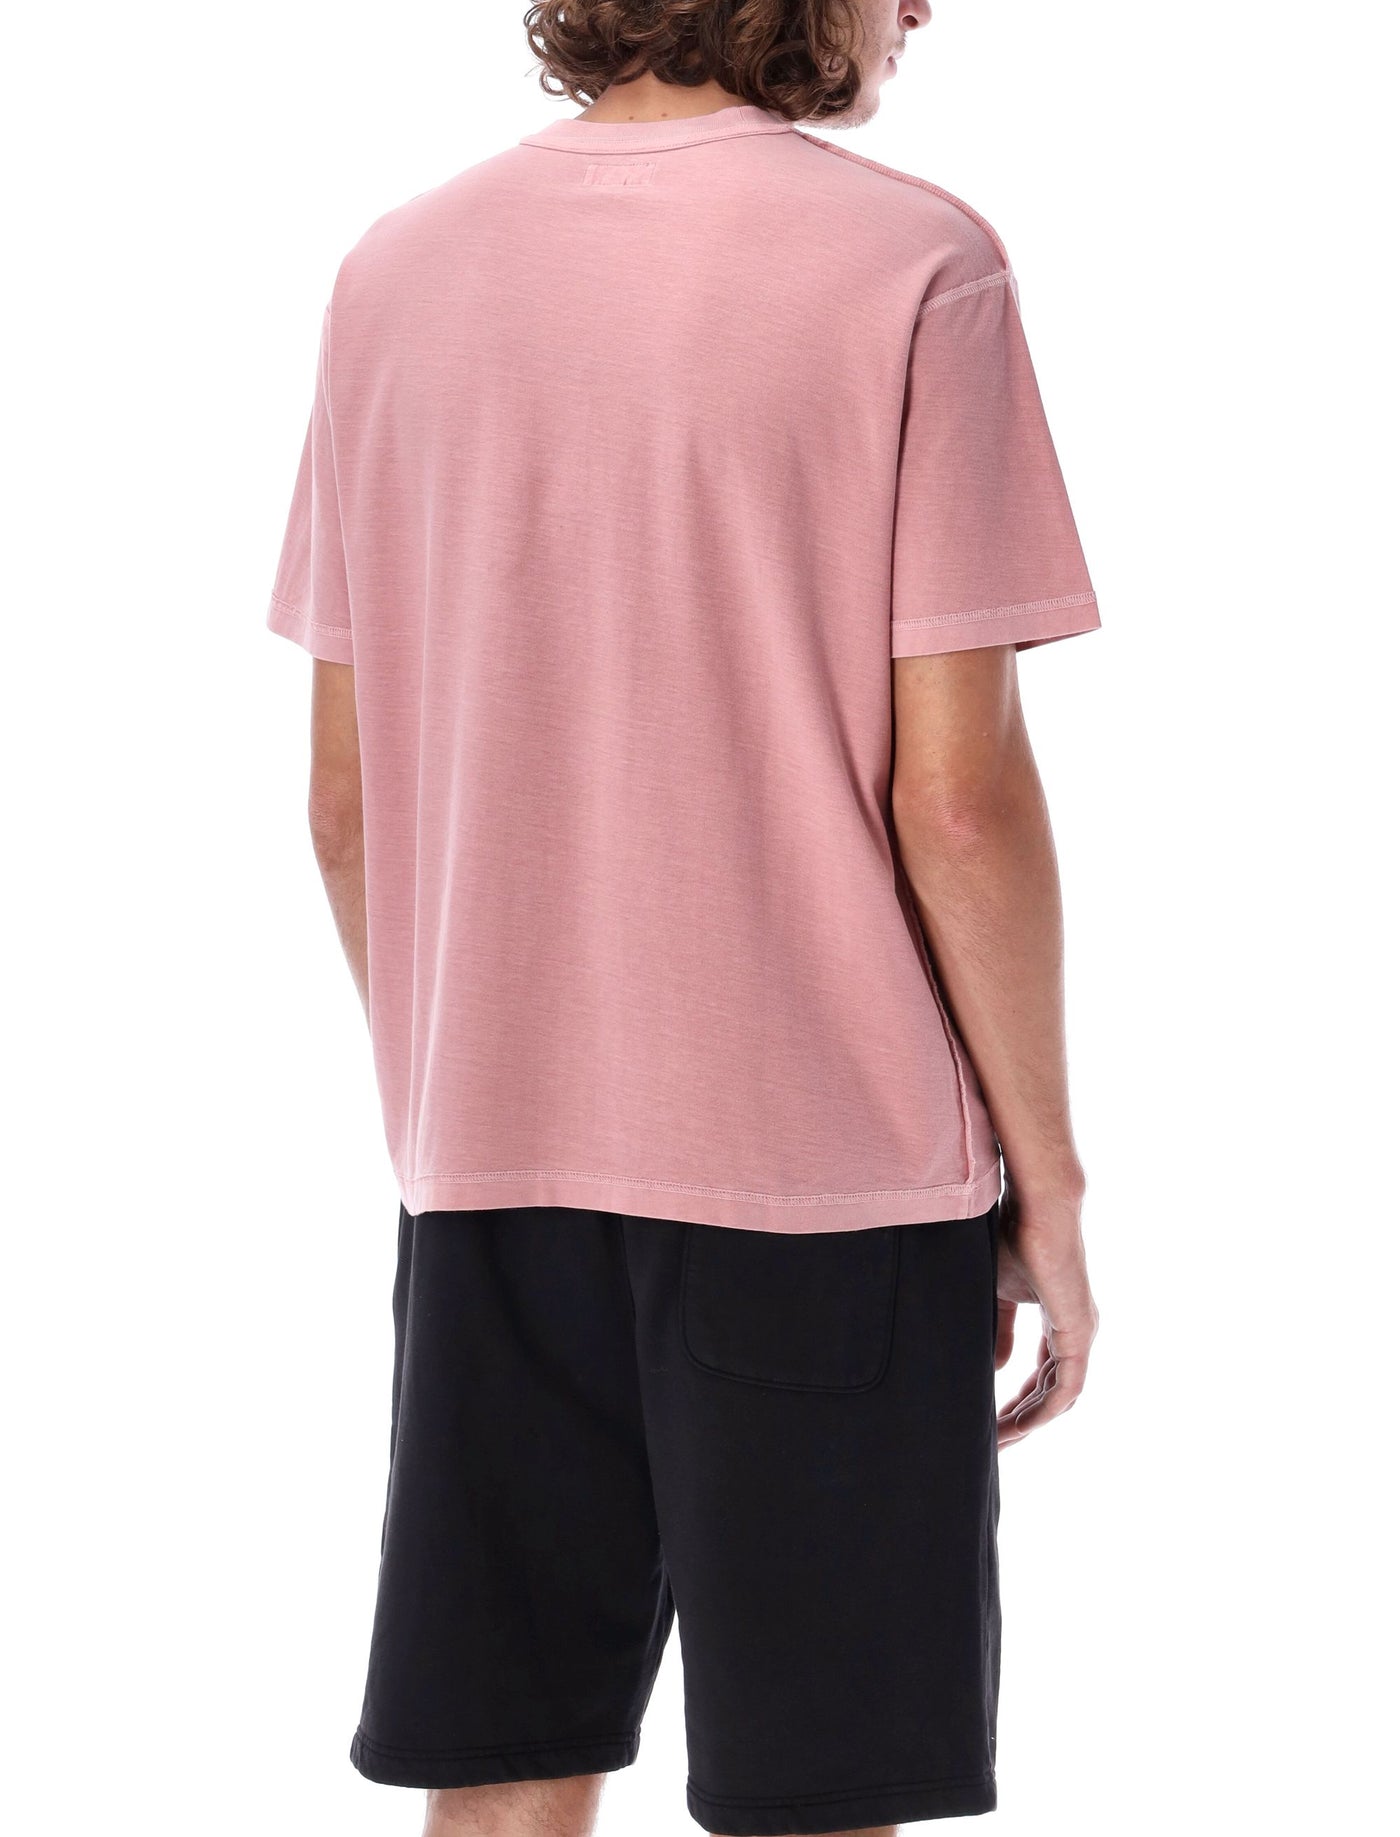 BERR STUSSY PIGMENT DYED INSIDE OUT T-SHIRT